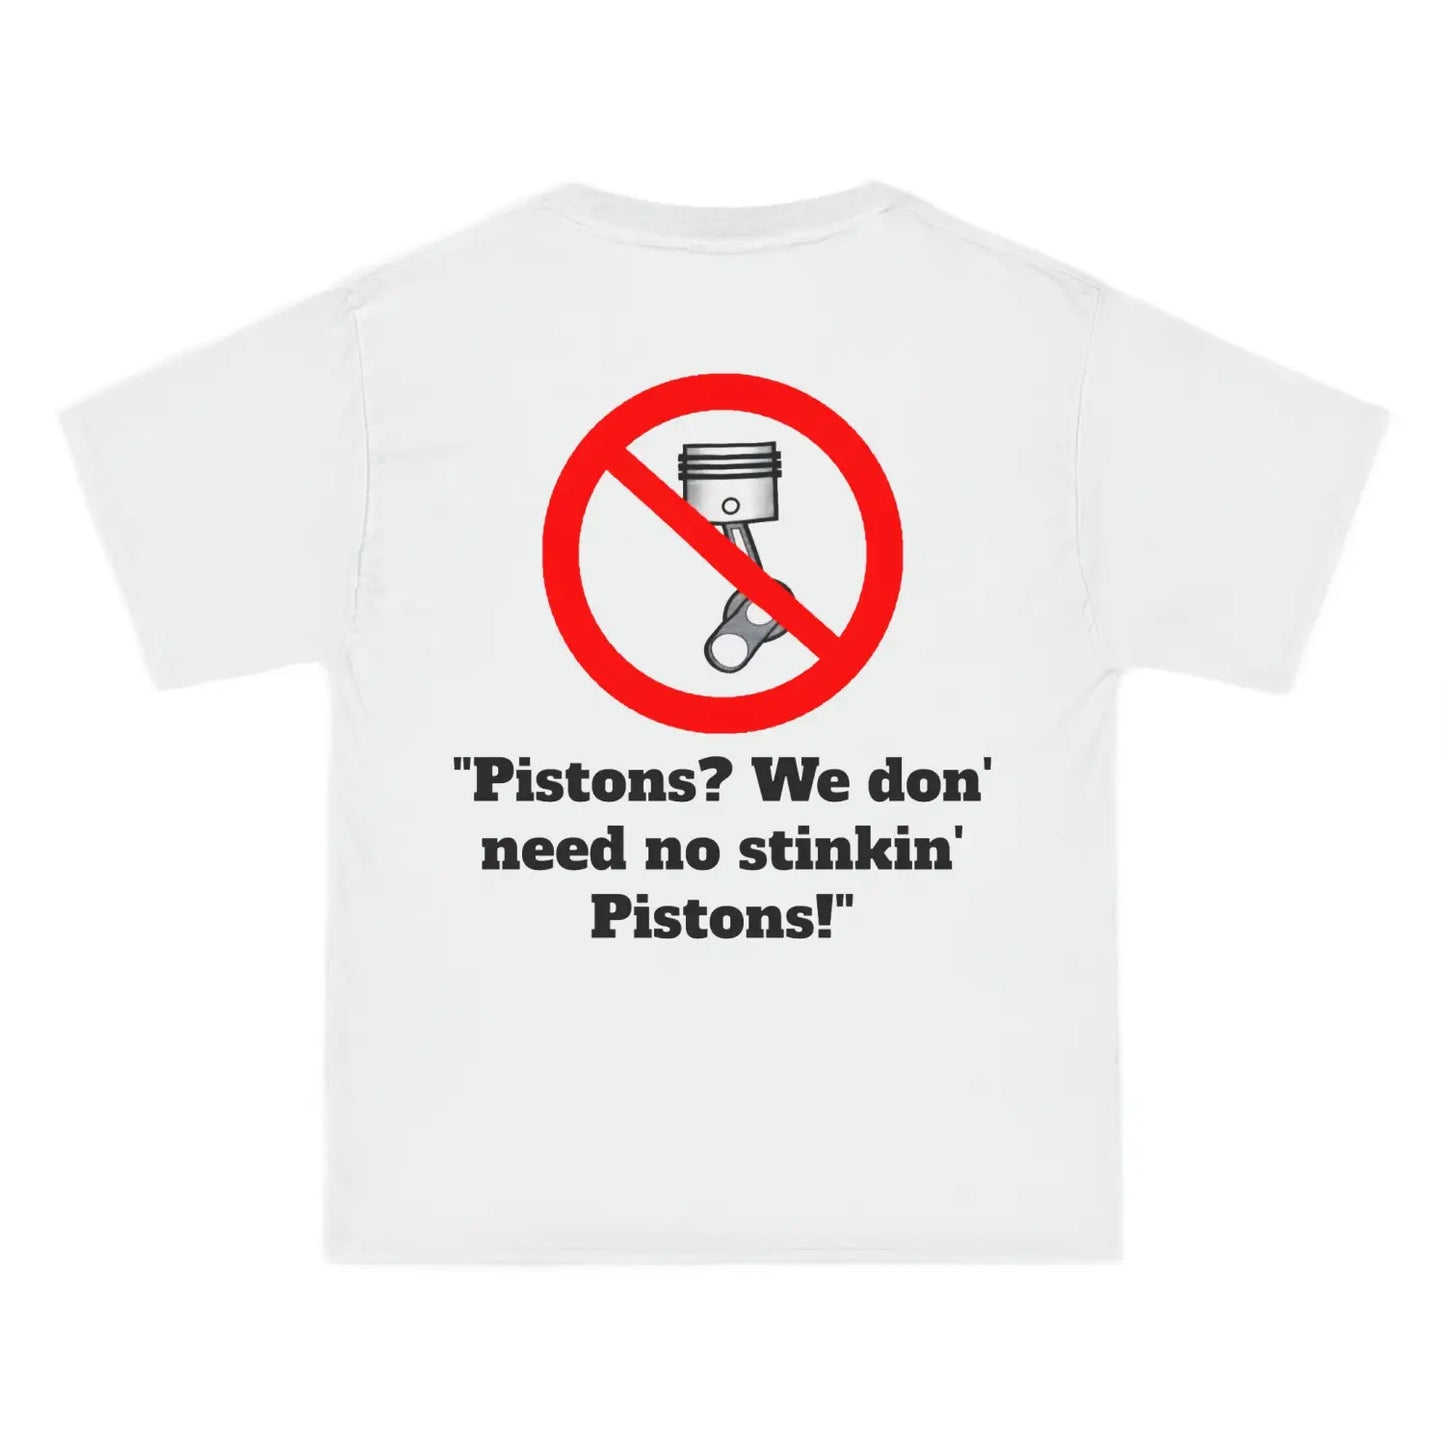 Rx-7 ’Don’ need no Pistons’ Beefy-T® Short-Sleeve